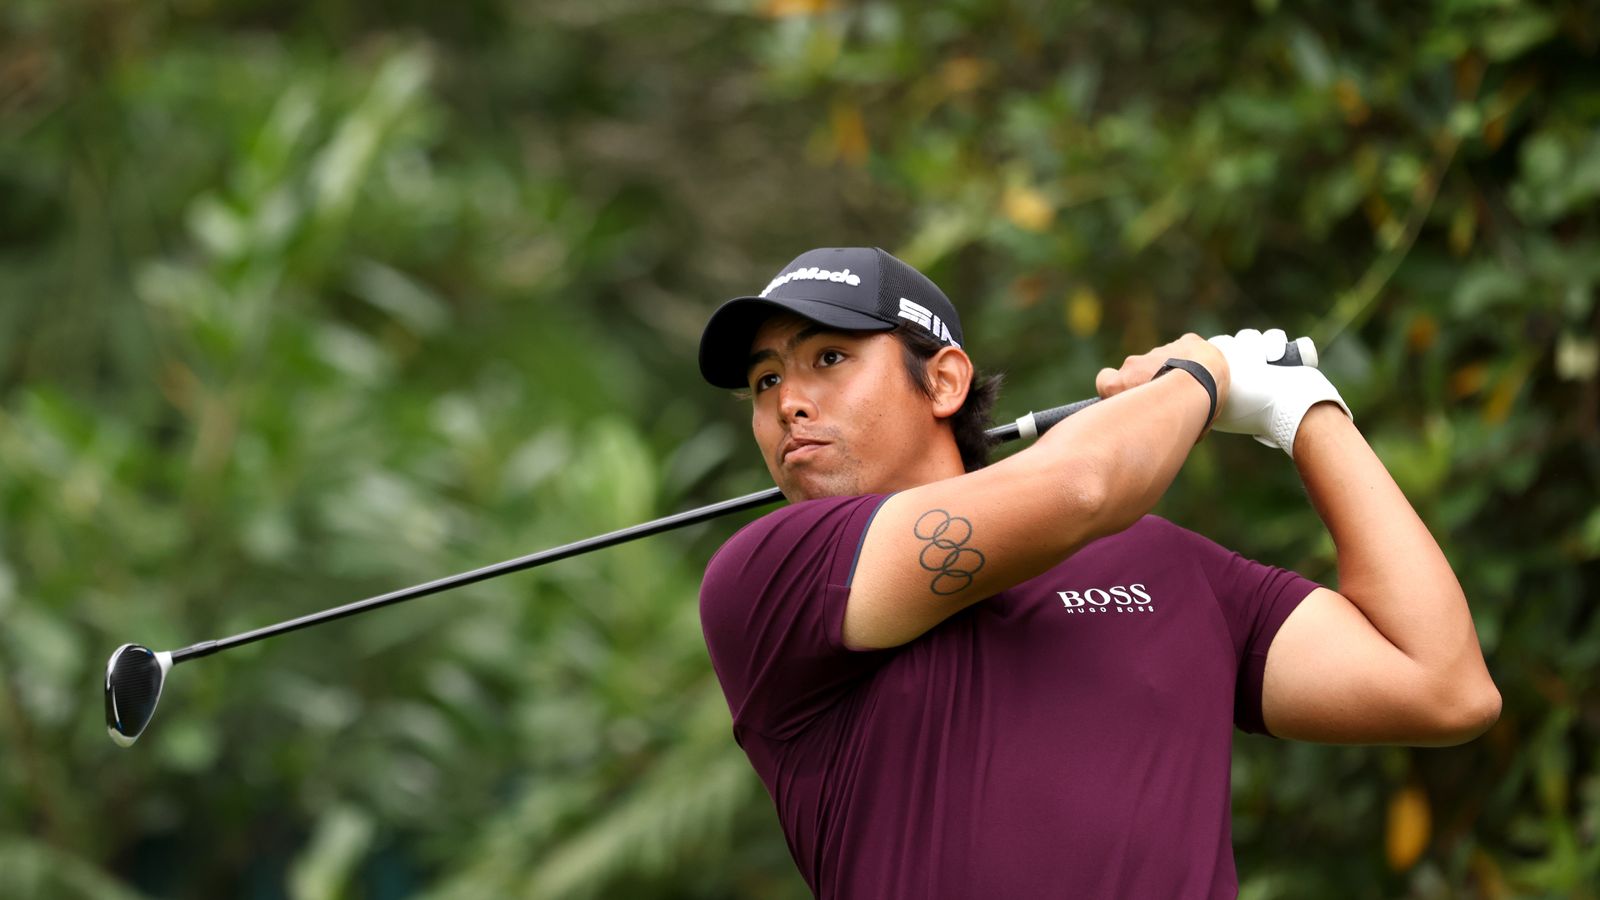 Portugal Masters: England’s Jordan Smith, Malaysia’s Gavin Green share halfway lead at DP World Tour event